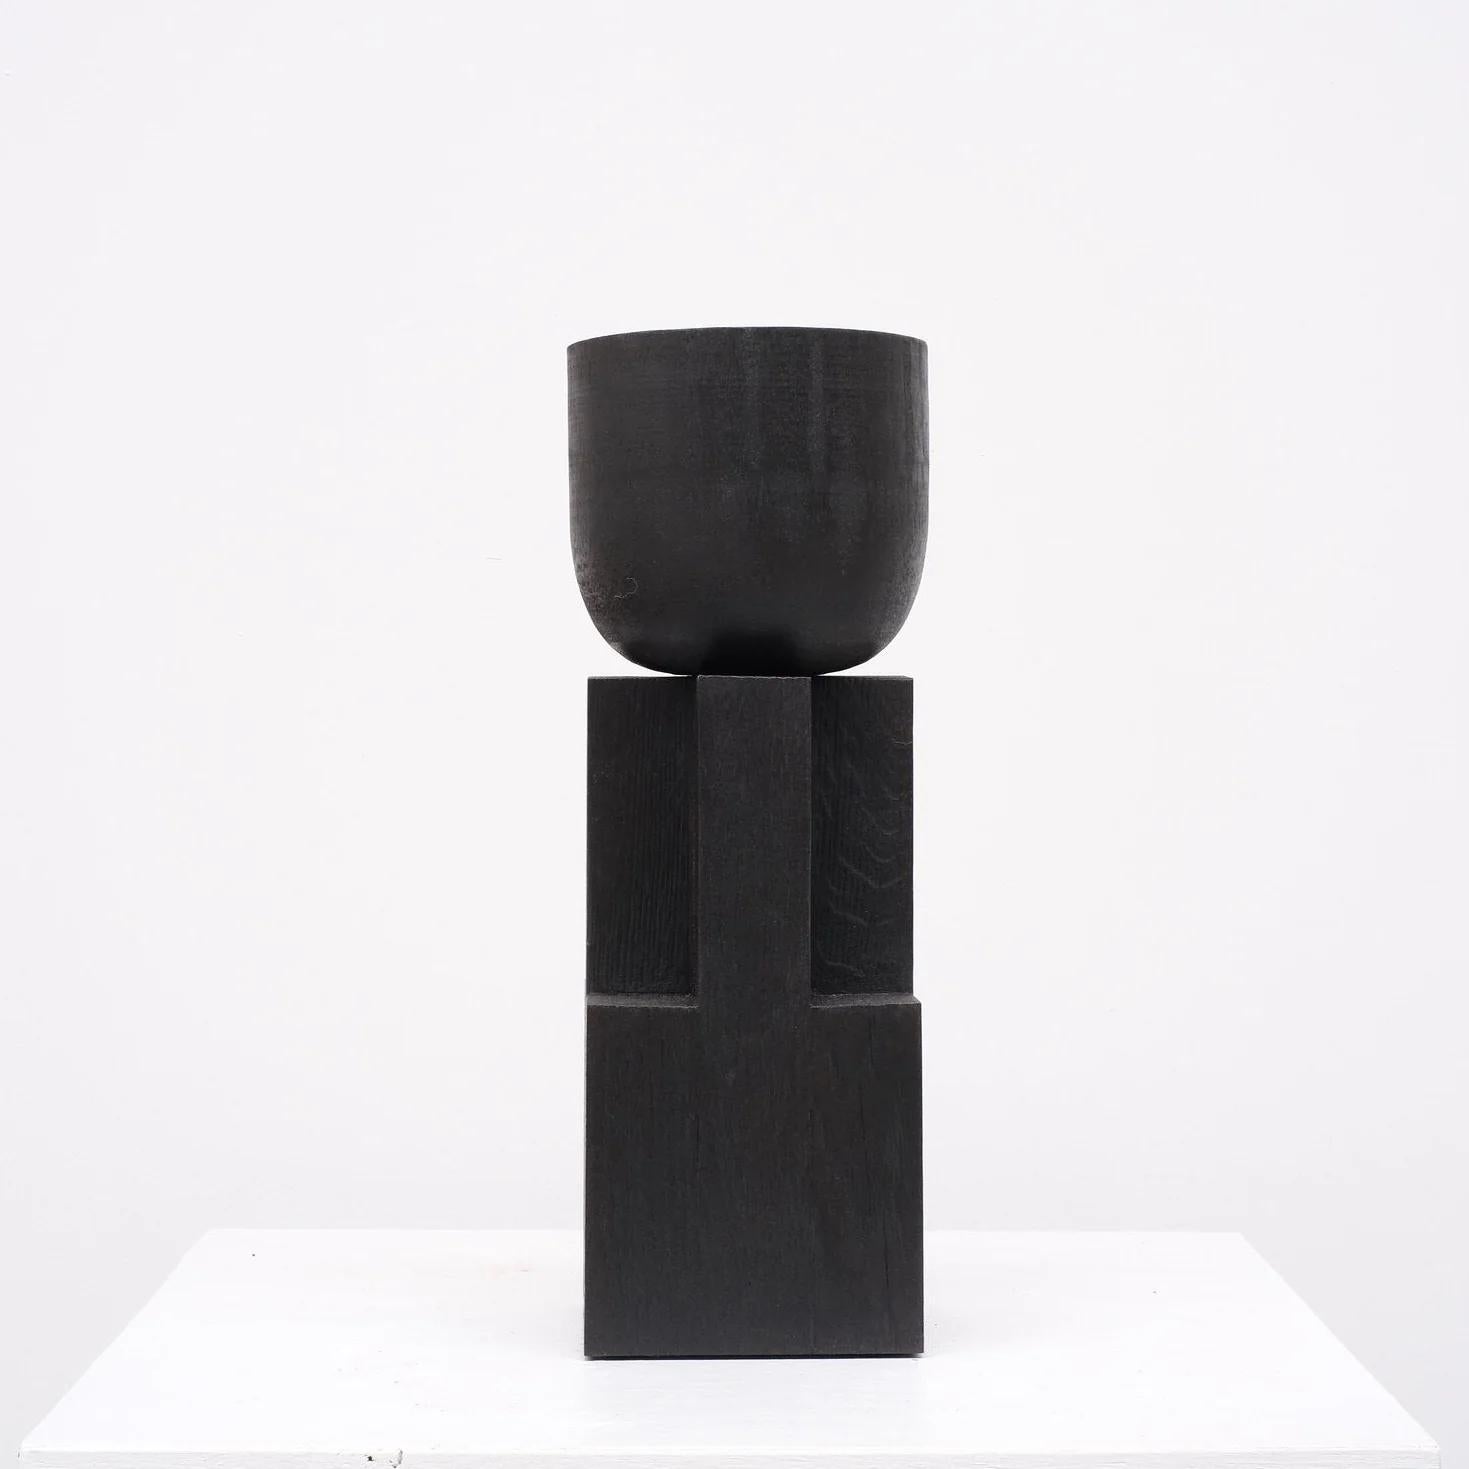 Black goblet vase by Arno Declercq
Materials: Burned Iroko wood and oak.
Dimensions: W 14 x D 14 x H 40 cm.


Arno Declercq
Belgian designer and art dealer who makes bespoke objects with passion for design, atmosphere, history and Craft. Arno grew